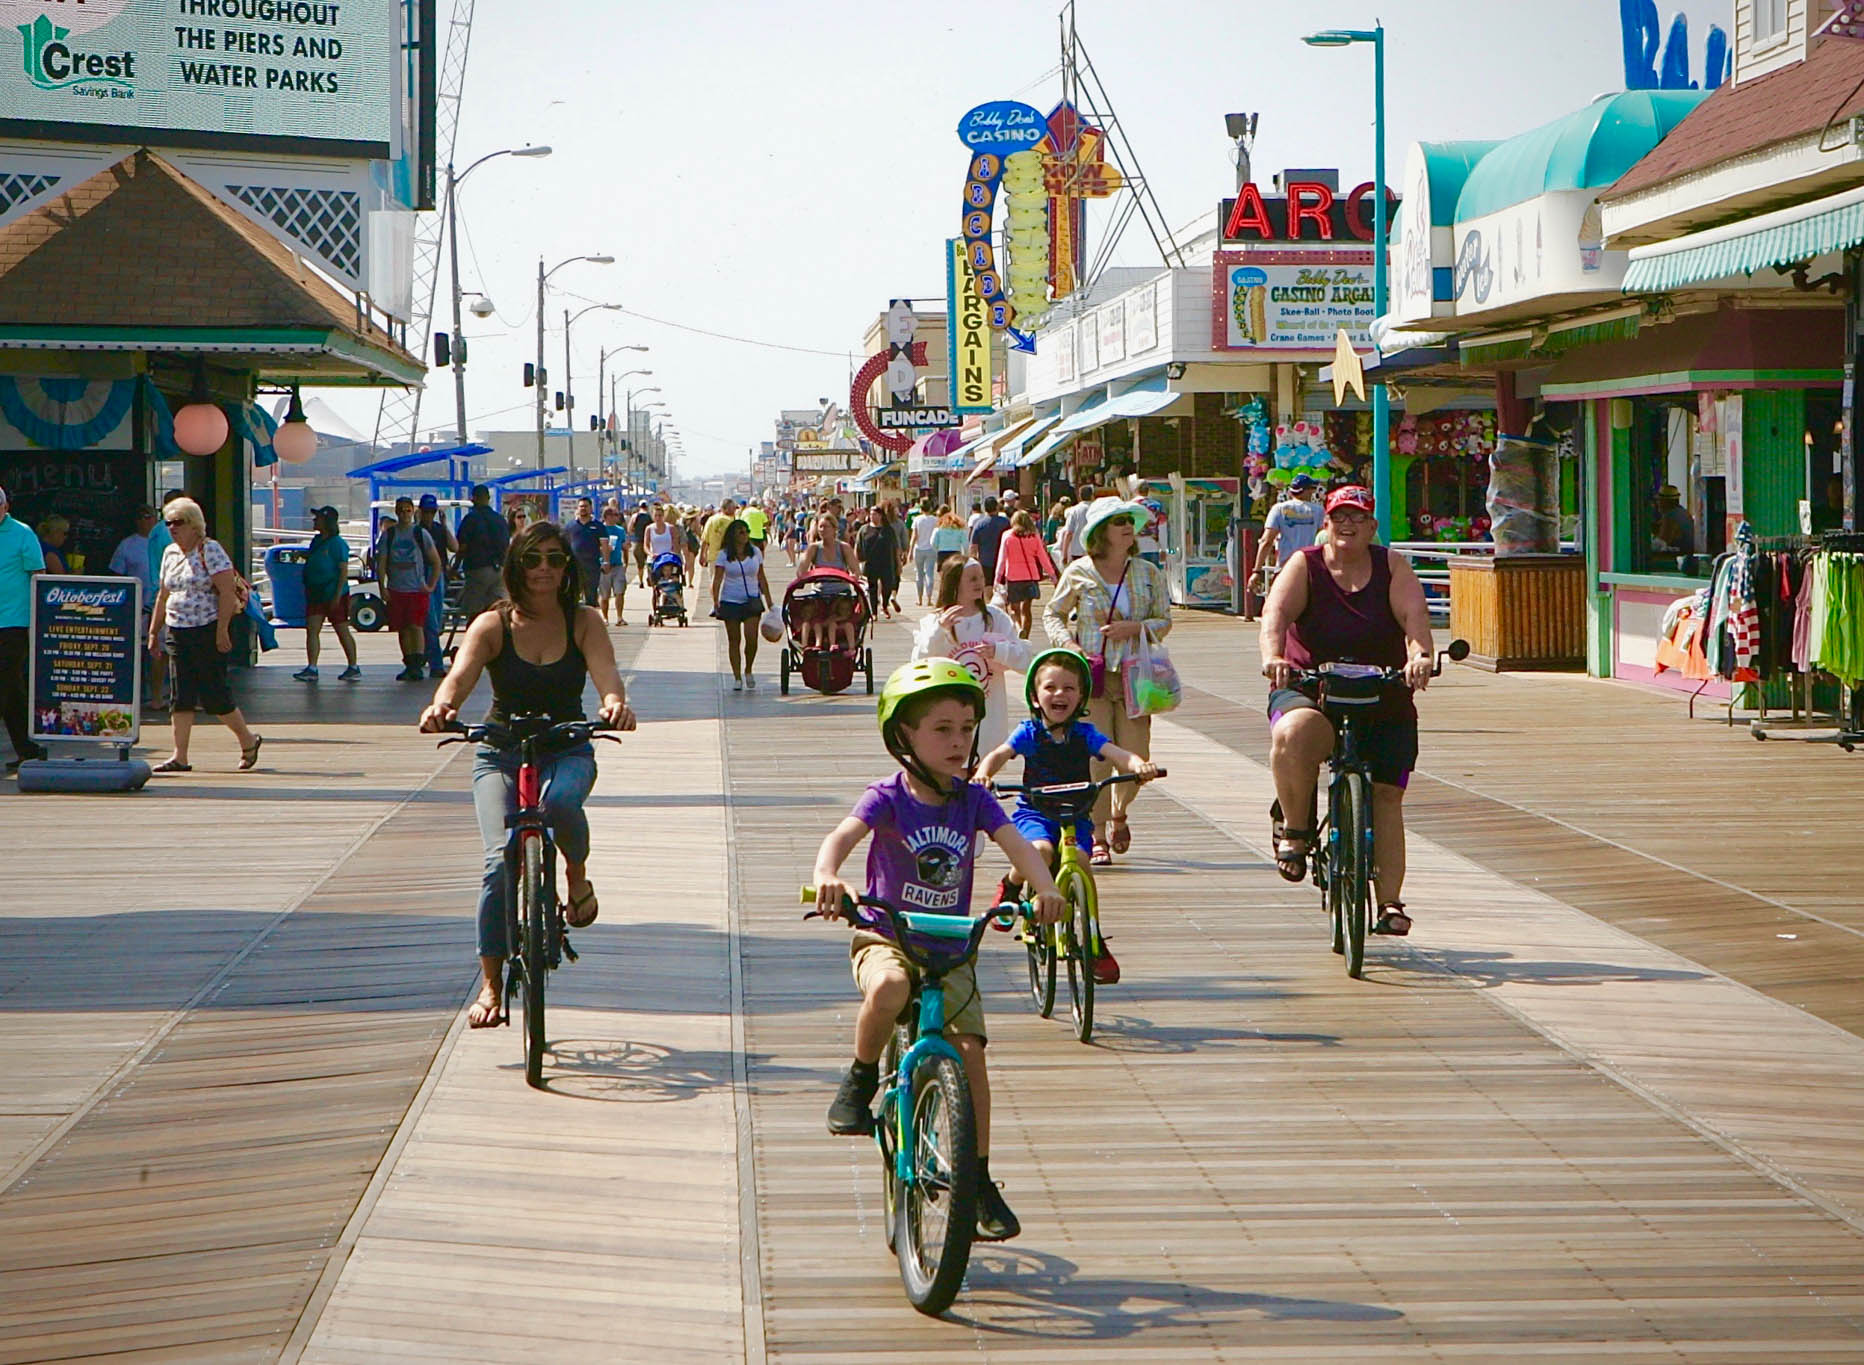 Wildwoods Boardwalk Cape May Experiences and Activities